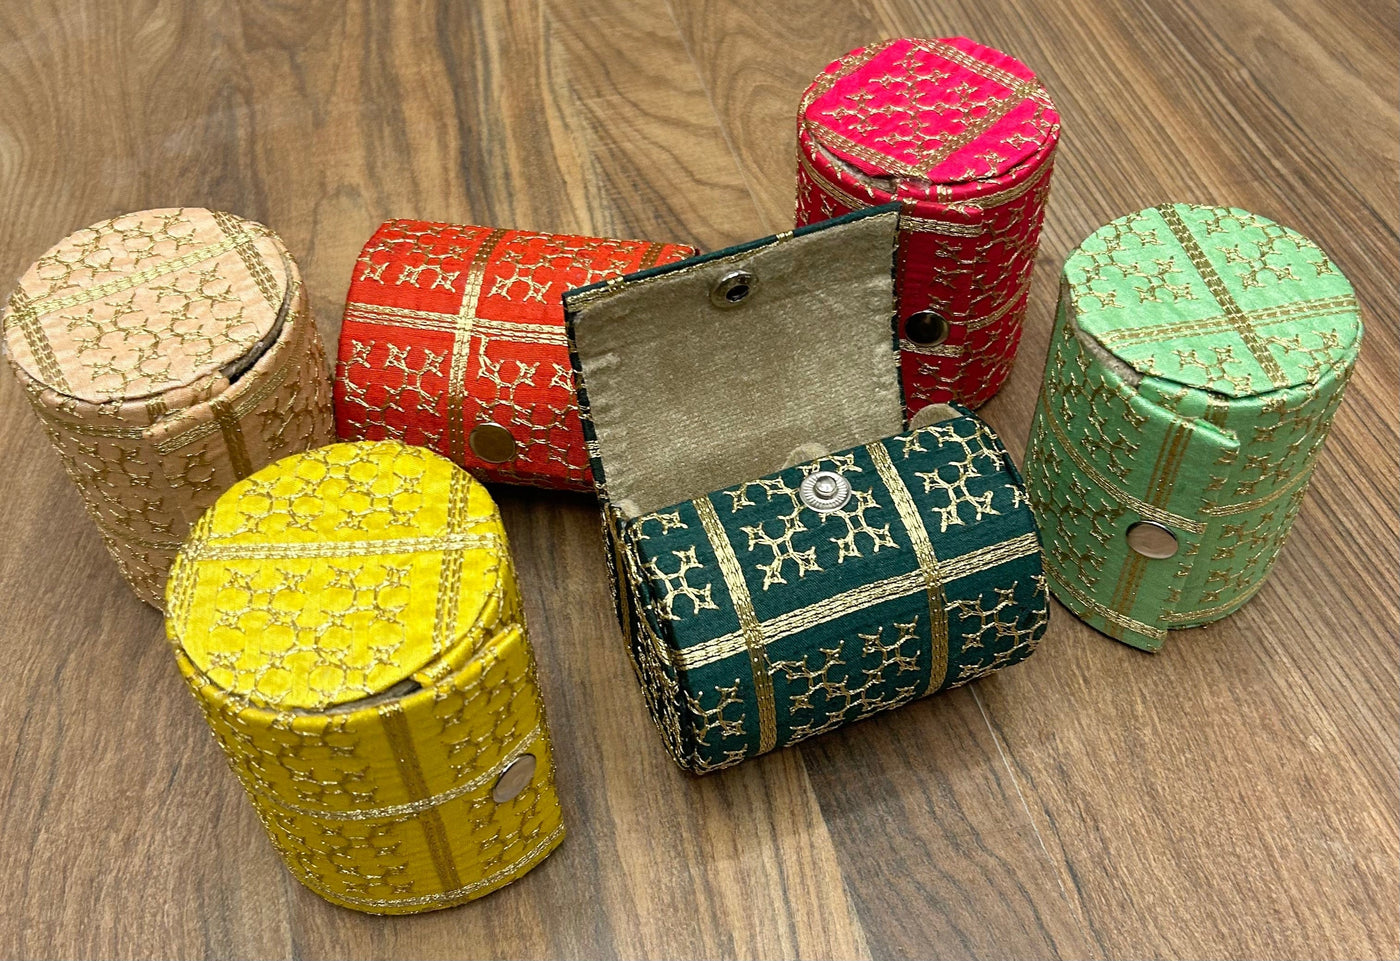 80 Rs each on buying 100+ pcs / WhatsApp at 8619550223 to order 🏷️ Bangles Box LAMANSH Gold Embroidered Bangle boxes for haldi mehendi sangeet favors for bridesmaids / Wedding return gifts 🎁 for bangles packing (4 inch size)